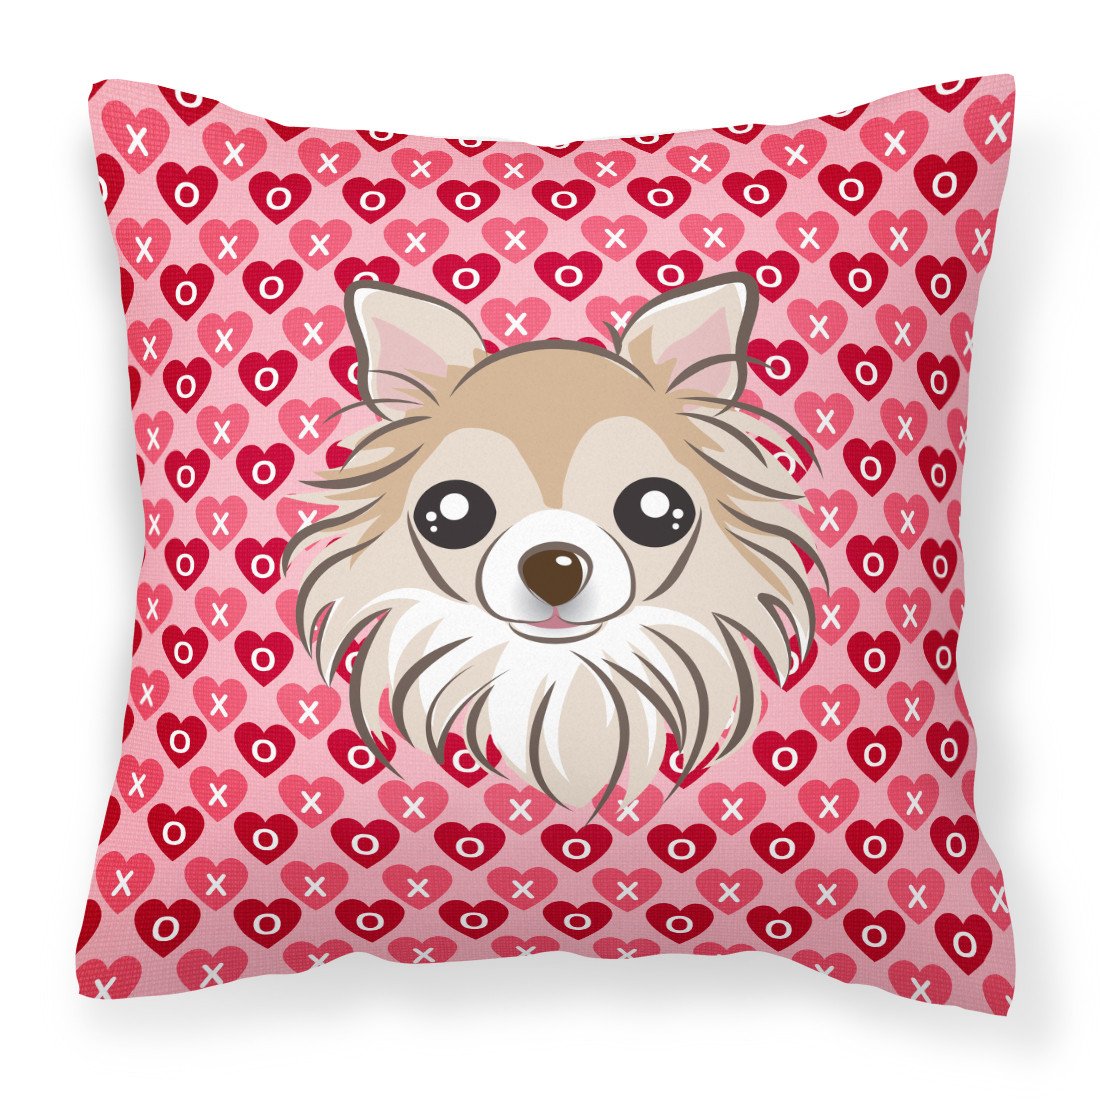 Chihuahua Hearts Fabric Decorative Pillow BB5321PW1818 by Caroline's Treasures